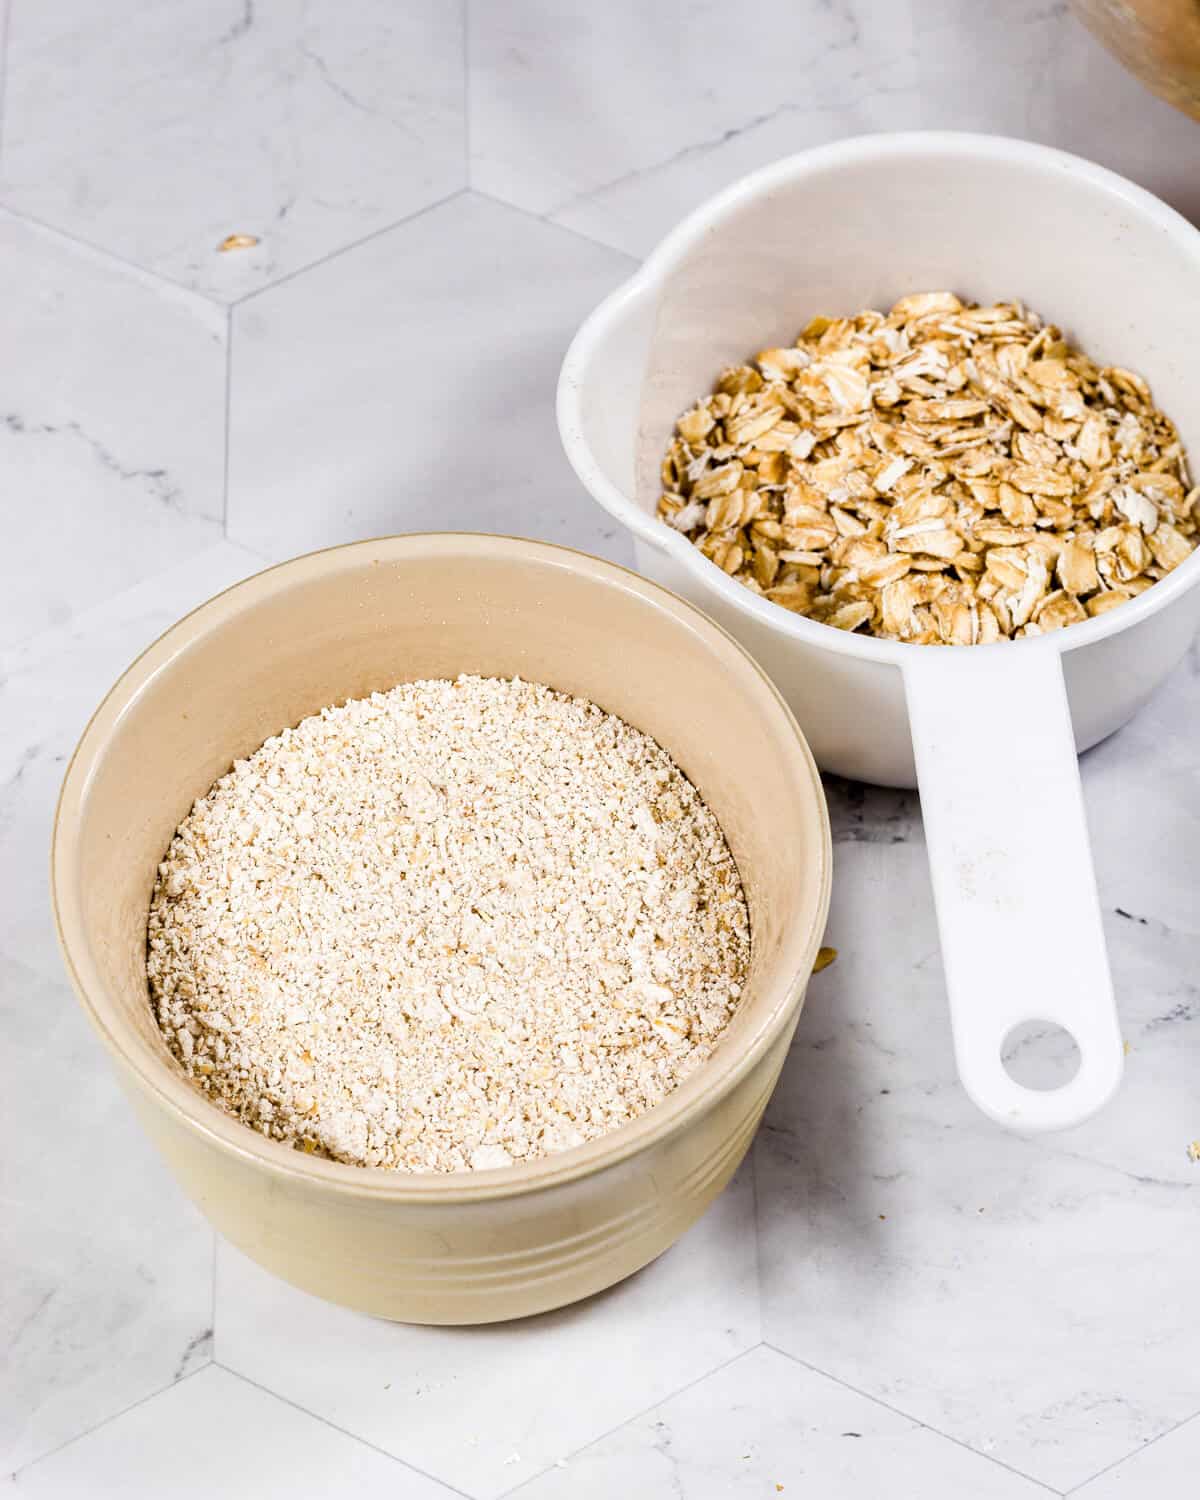 A bowl of blended oats next to a baking cup with rolled oats.